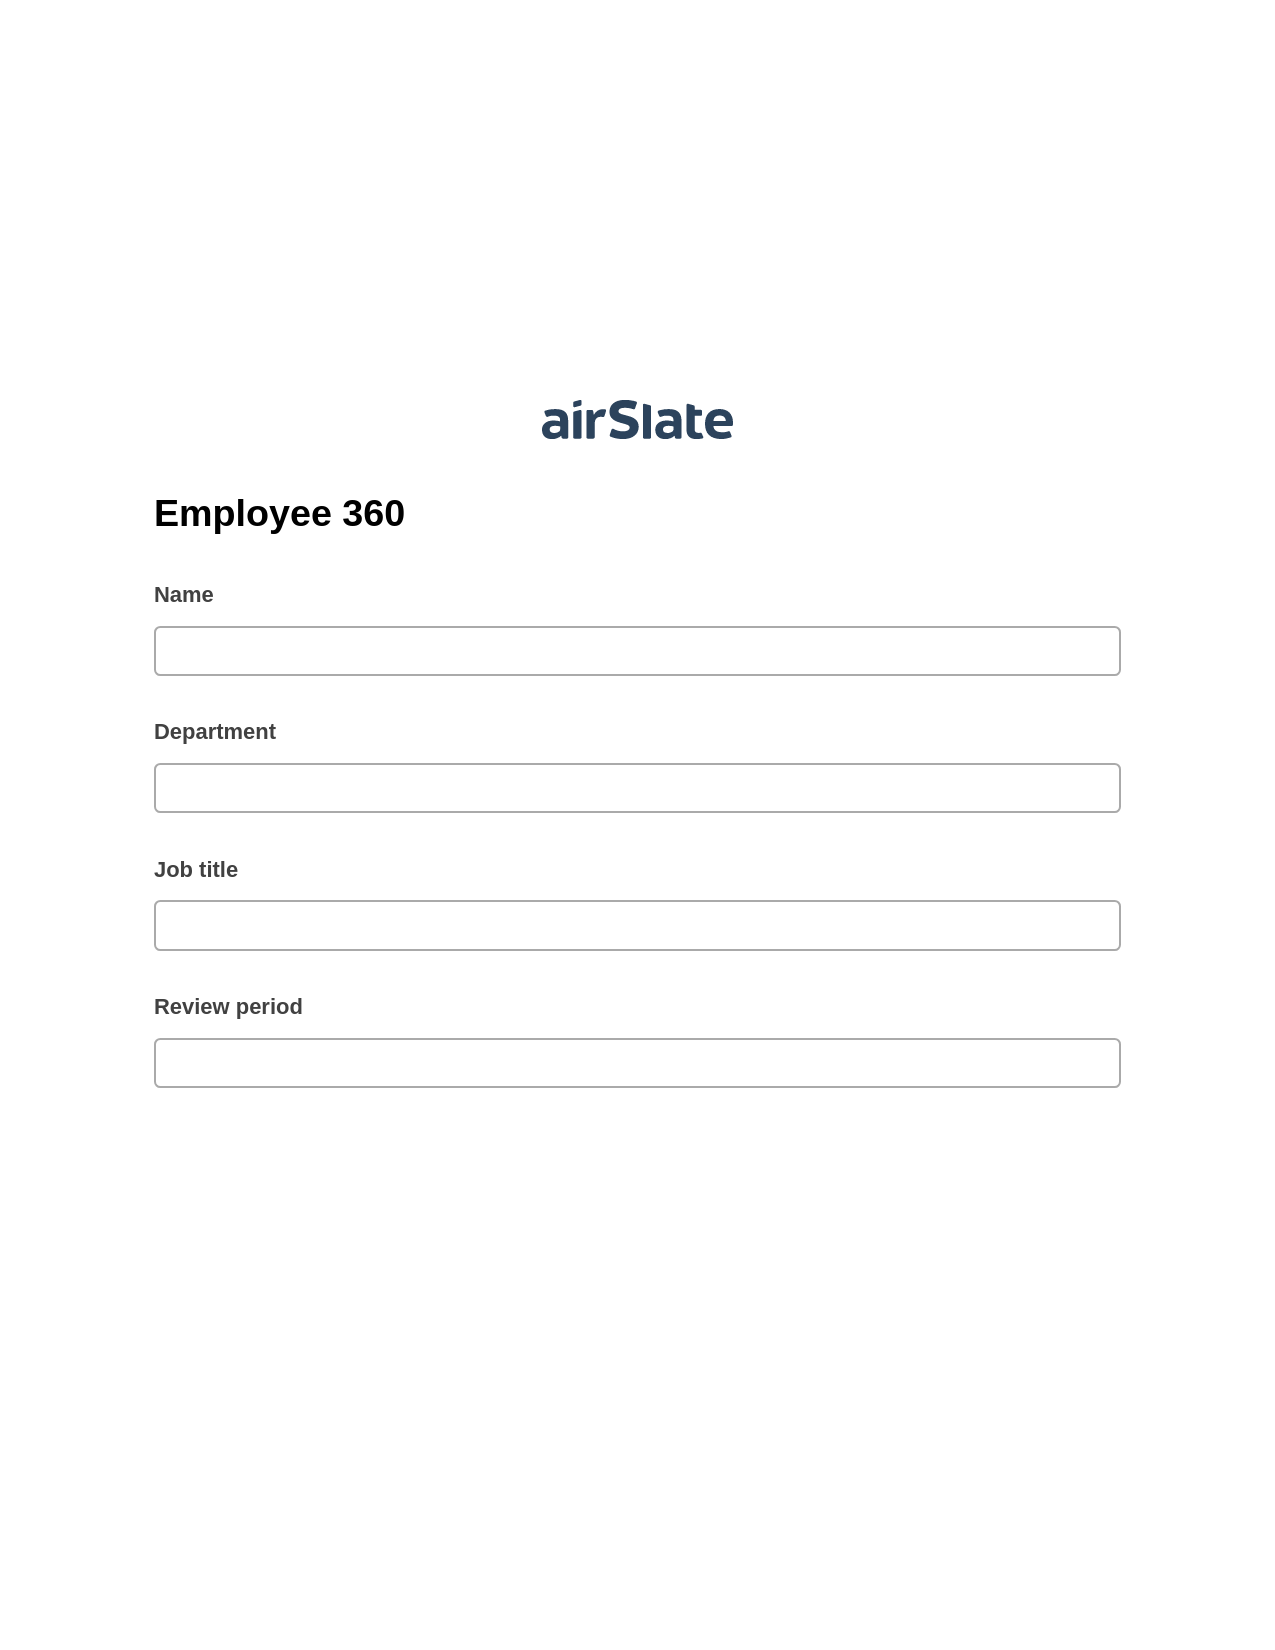 Employee 360 Pre-fill from Salesforce Records with SOQL Bot, Update MS Dynamics 365 Record Bot, Slack Notification Postfinish Bot